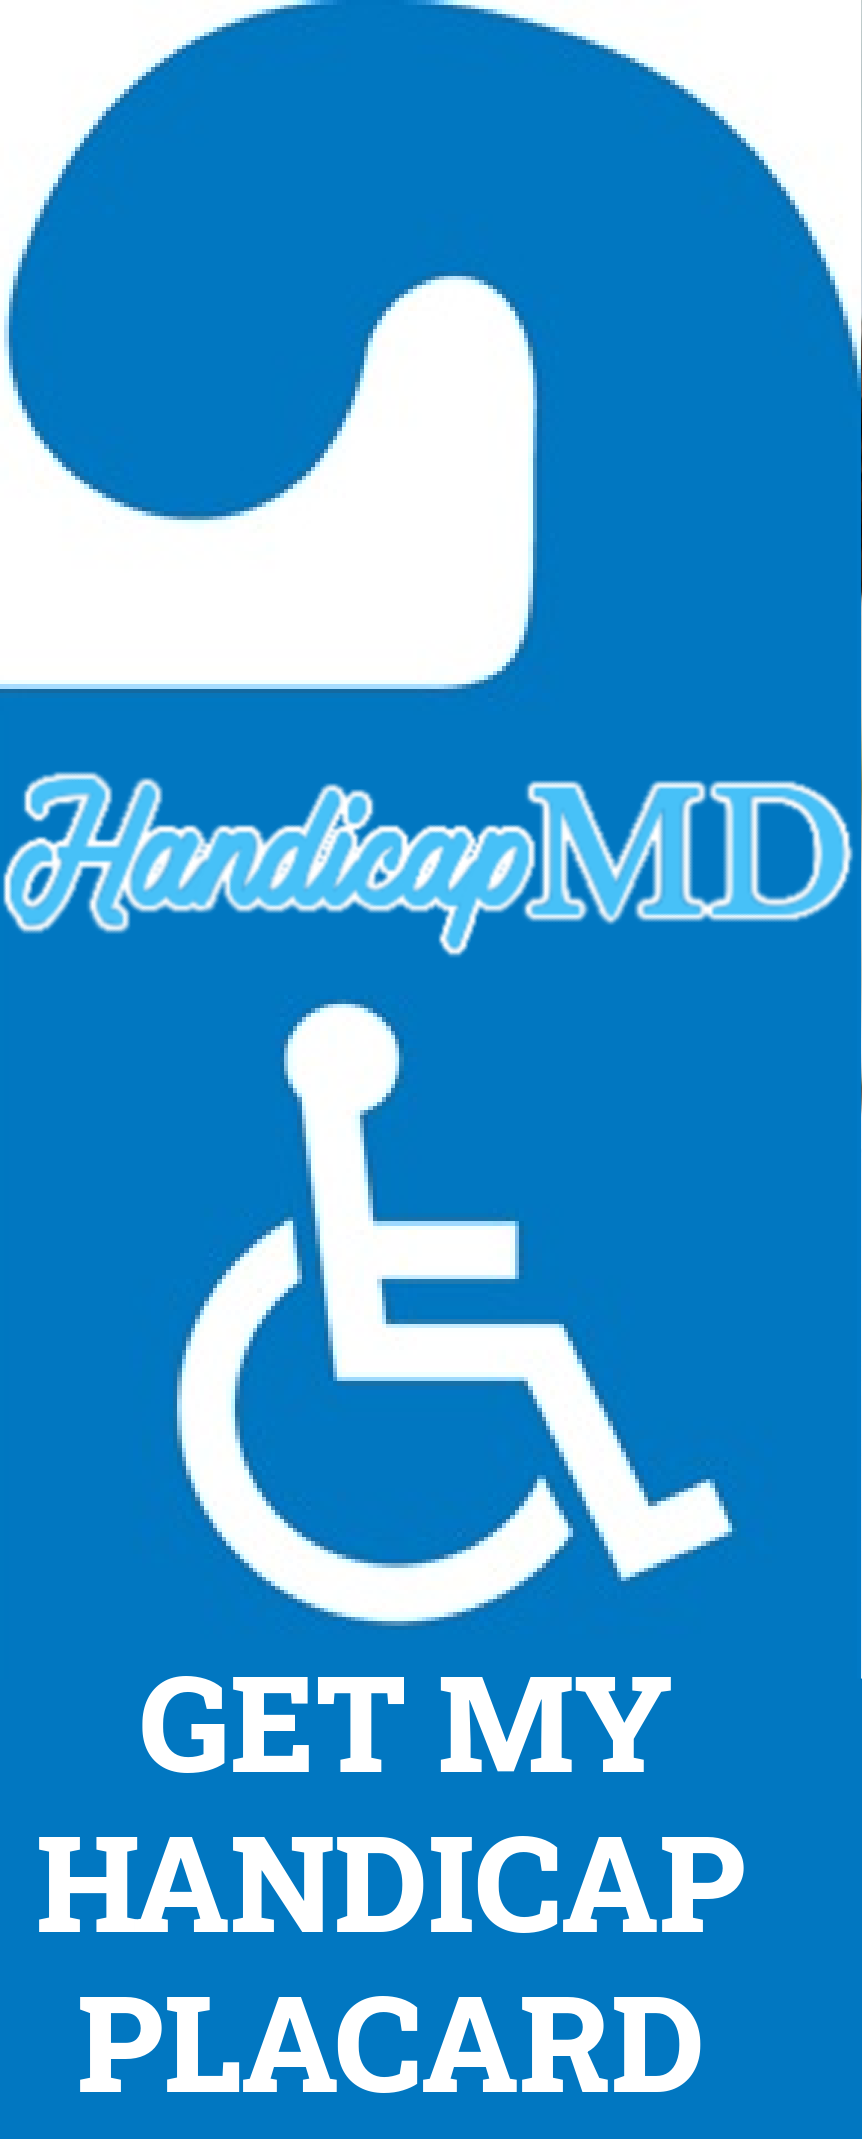 Myths vs. Facts: Debunking Common Misconceptions about Handicap Placards in Minneapolis MN